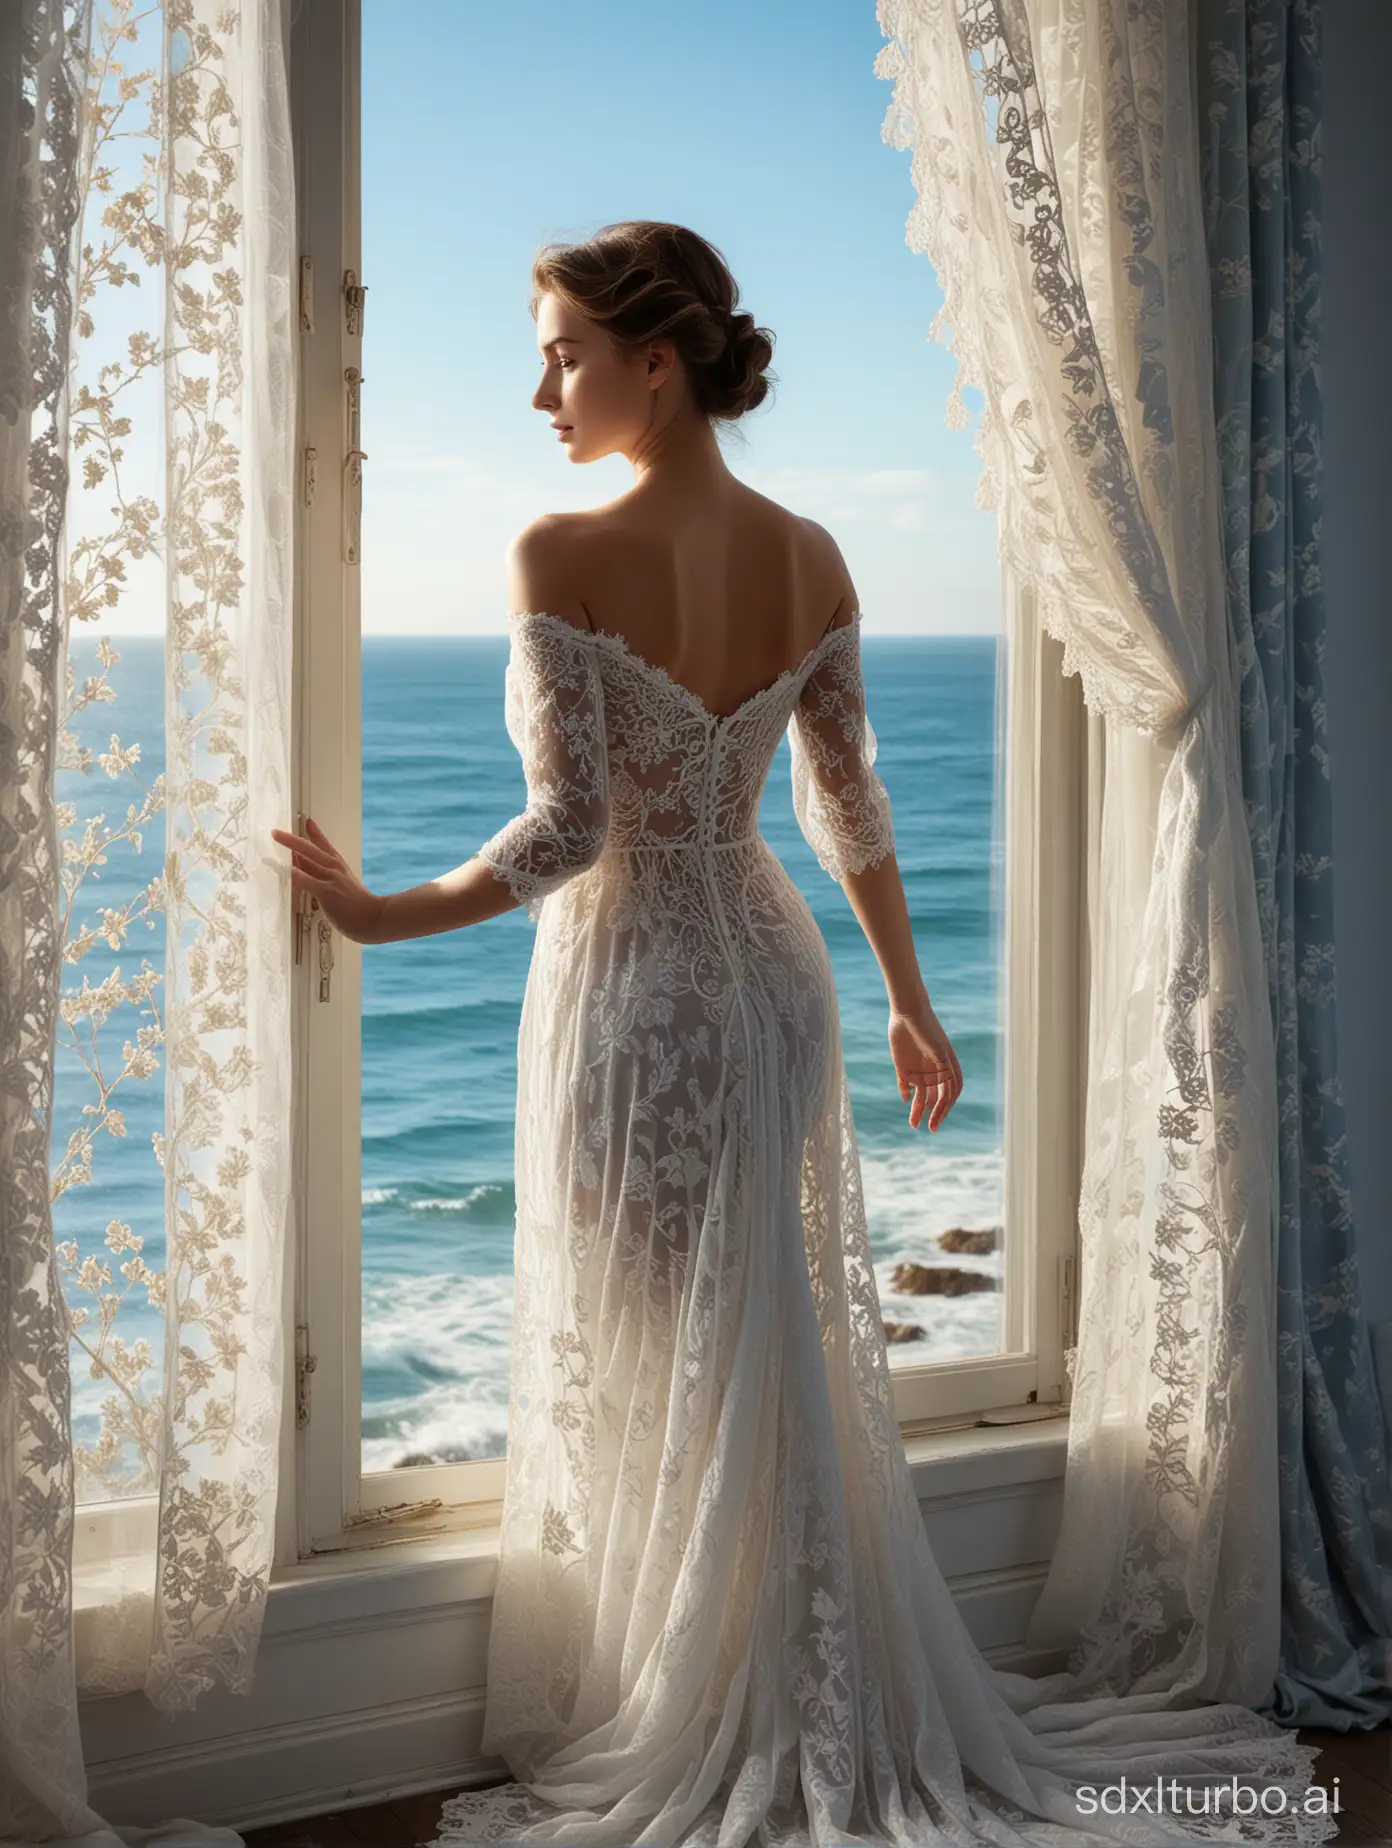 Tranquil-Woman-Gazing-at-Sea-Elegance-in-Sunlight